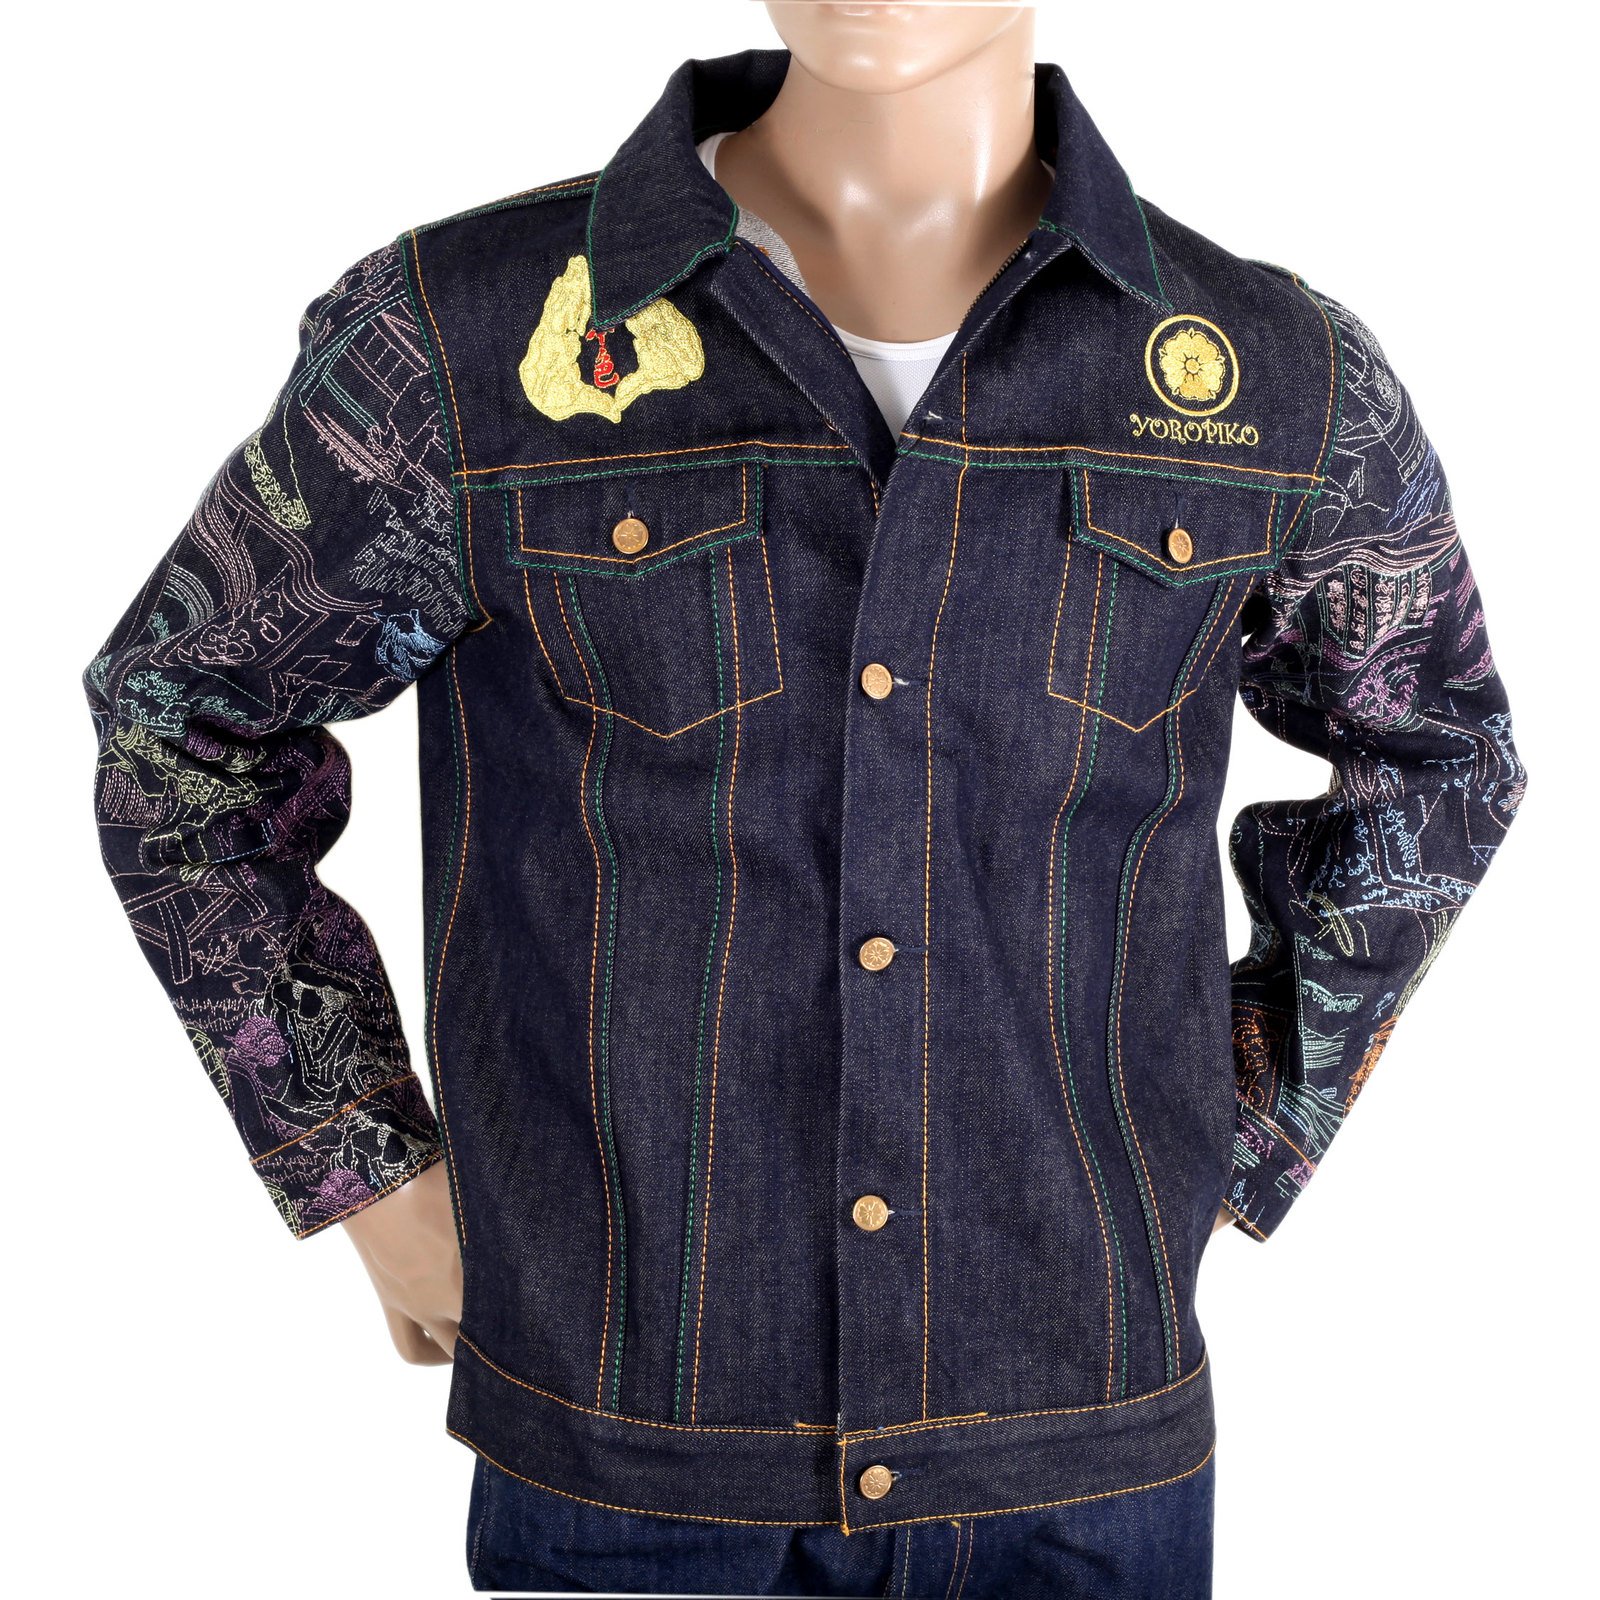 YOROPIKO JAY-Z EXCLUSIVE LIMITED EDITION VINTAGE CUT RAW SELVEDGE  EMBROIDERED DENIM JACKET YORO9174